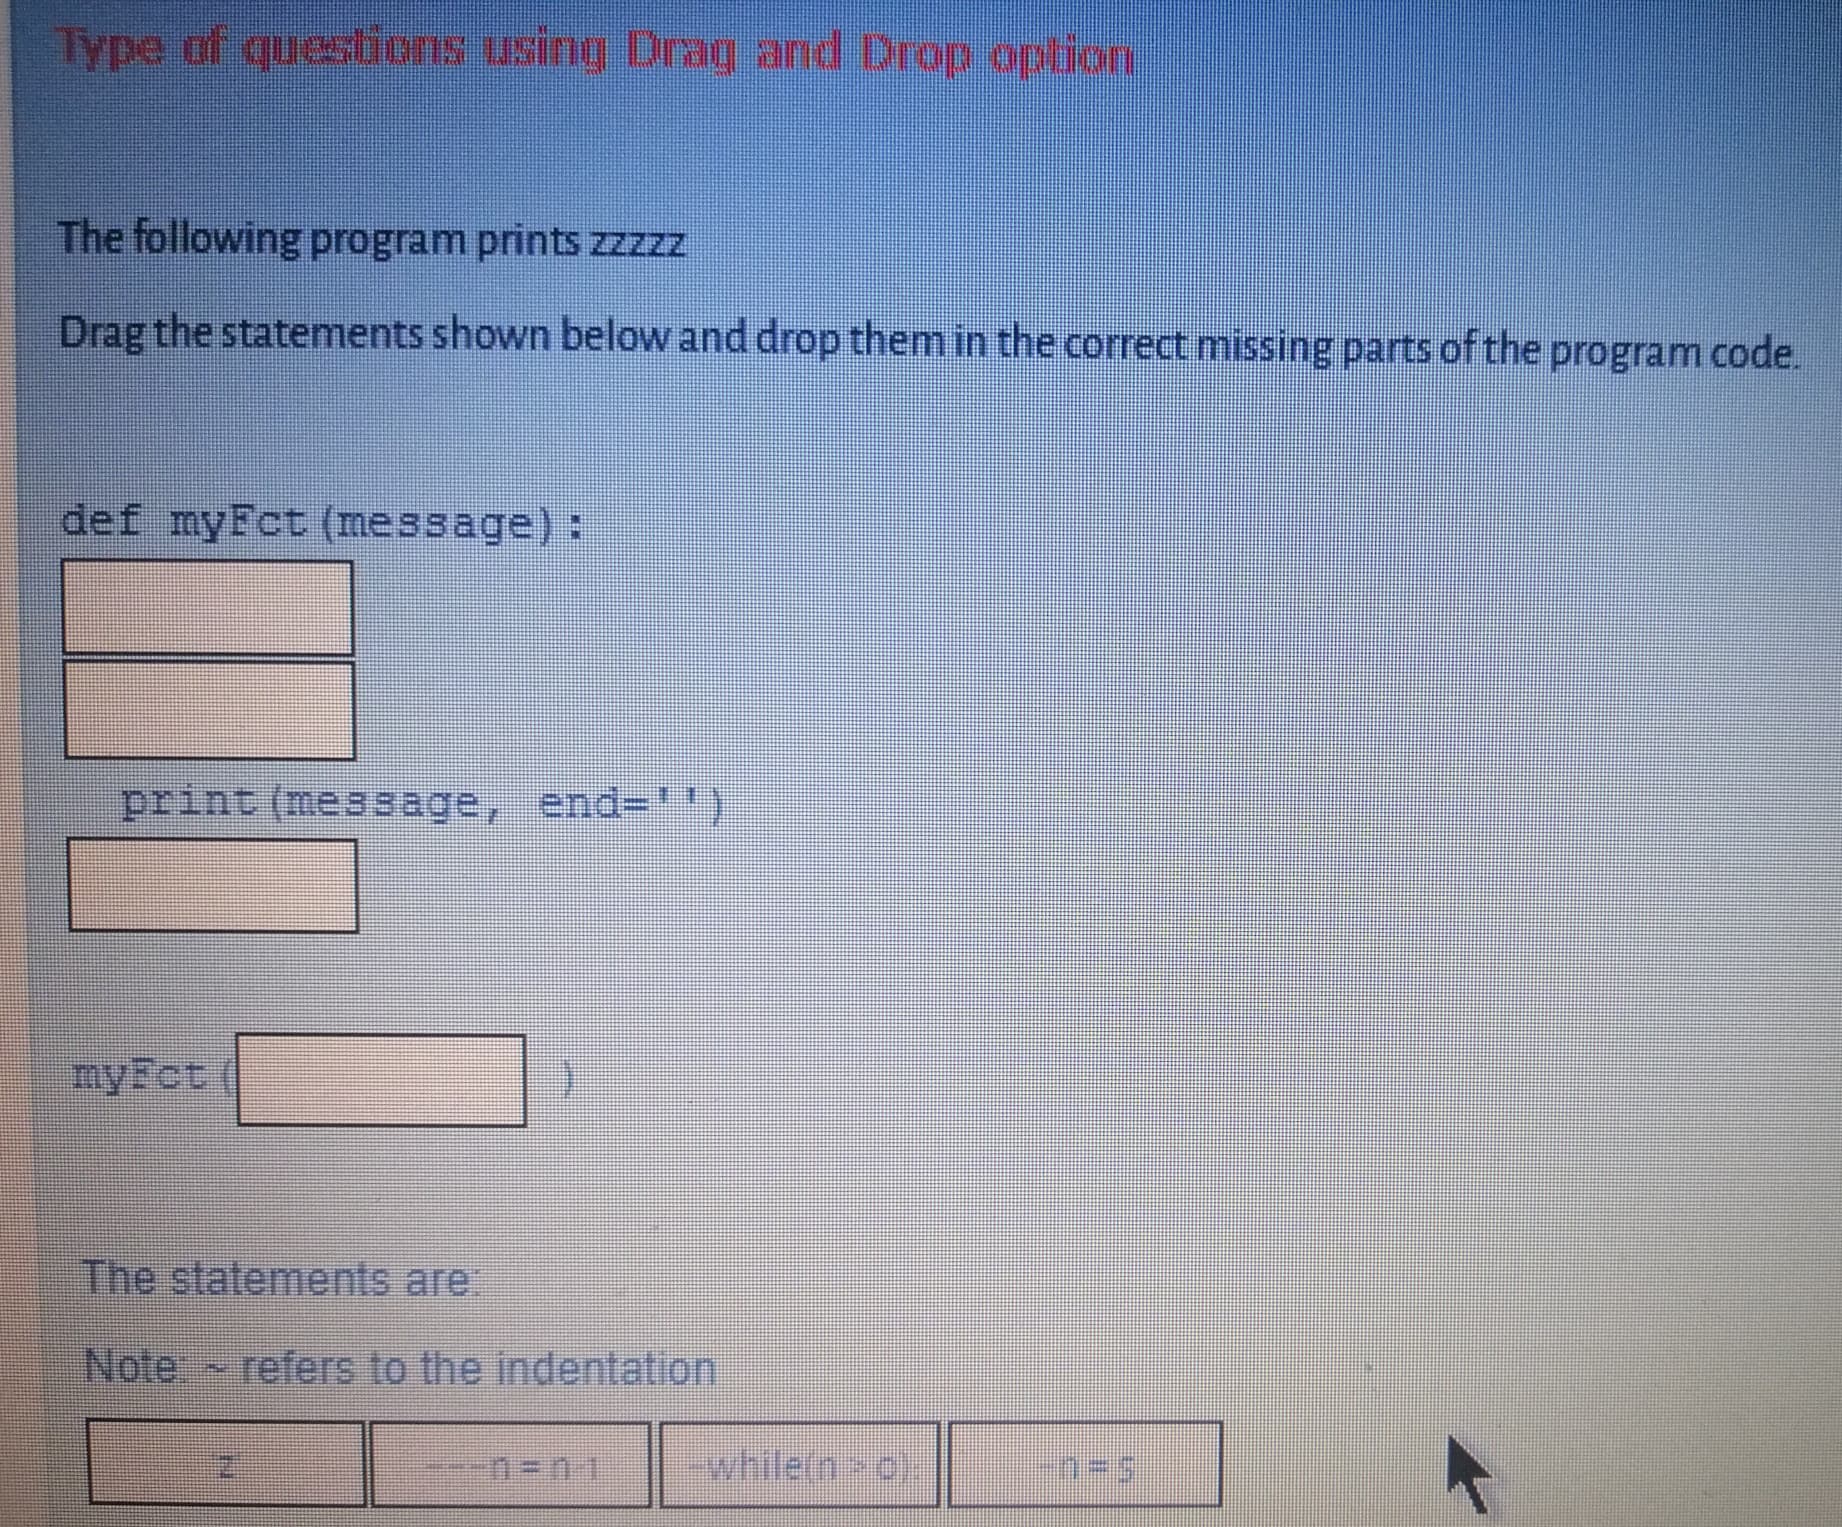 The following program prints zzzzz
Drag the statements shown below and drop them in the correct missing parts of the program code.
